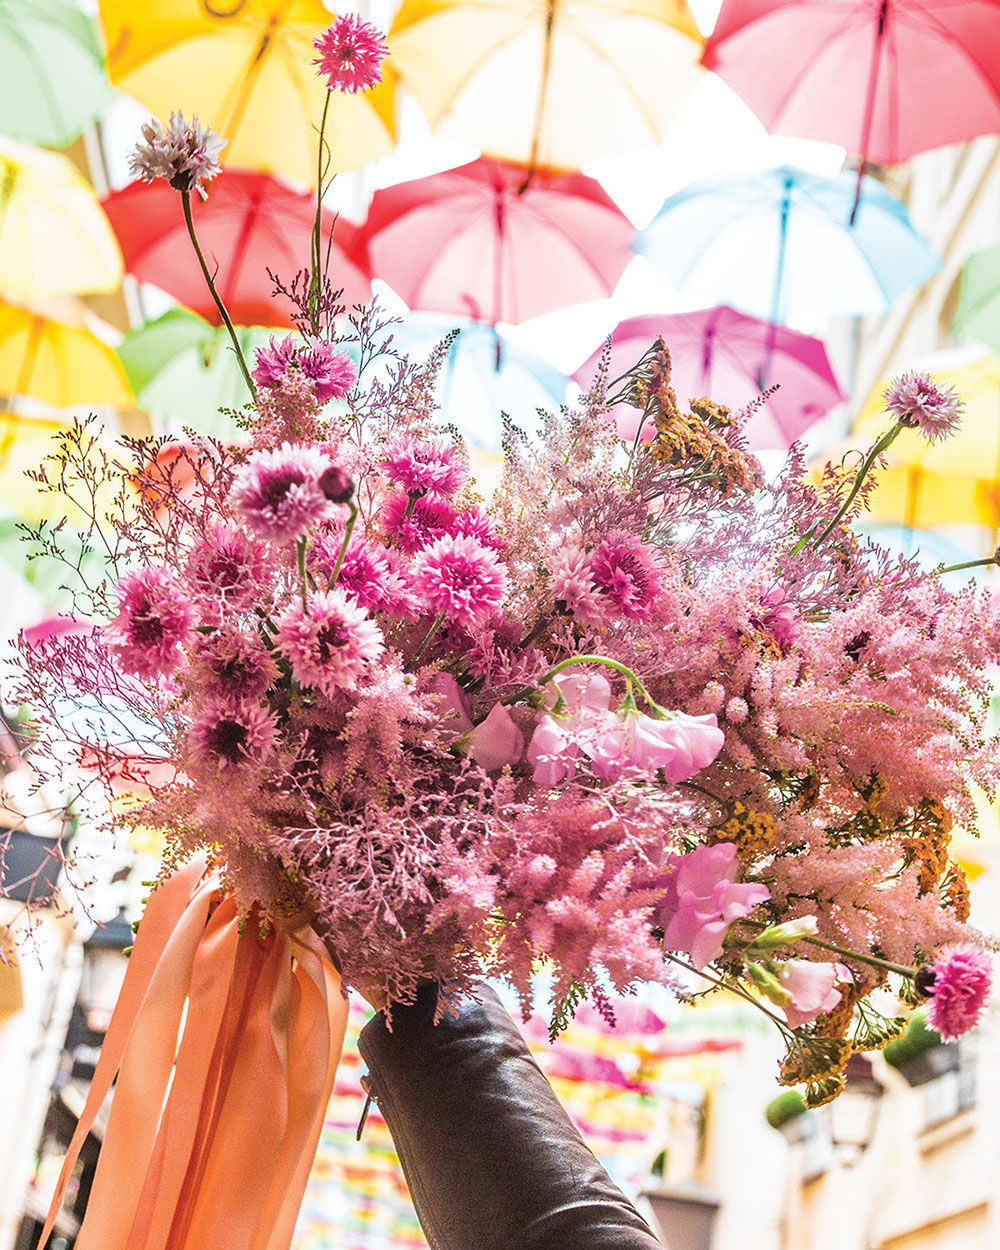 A hand holds lush pink bouquet tied with streaming peach ribbon against a colorful sky of suspended umbrellas